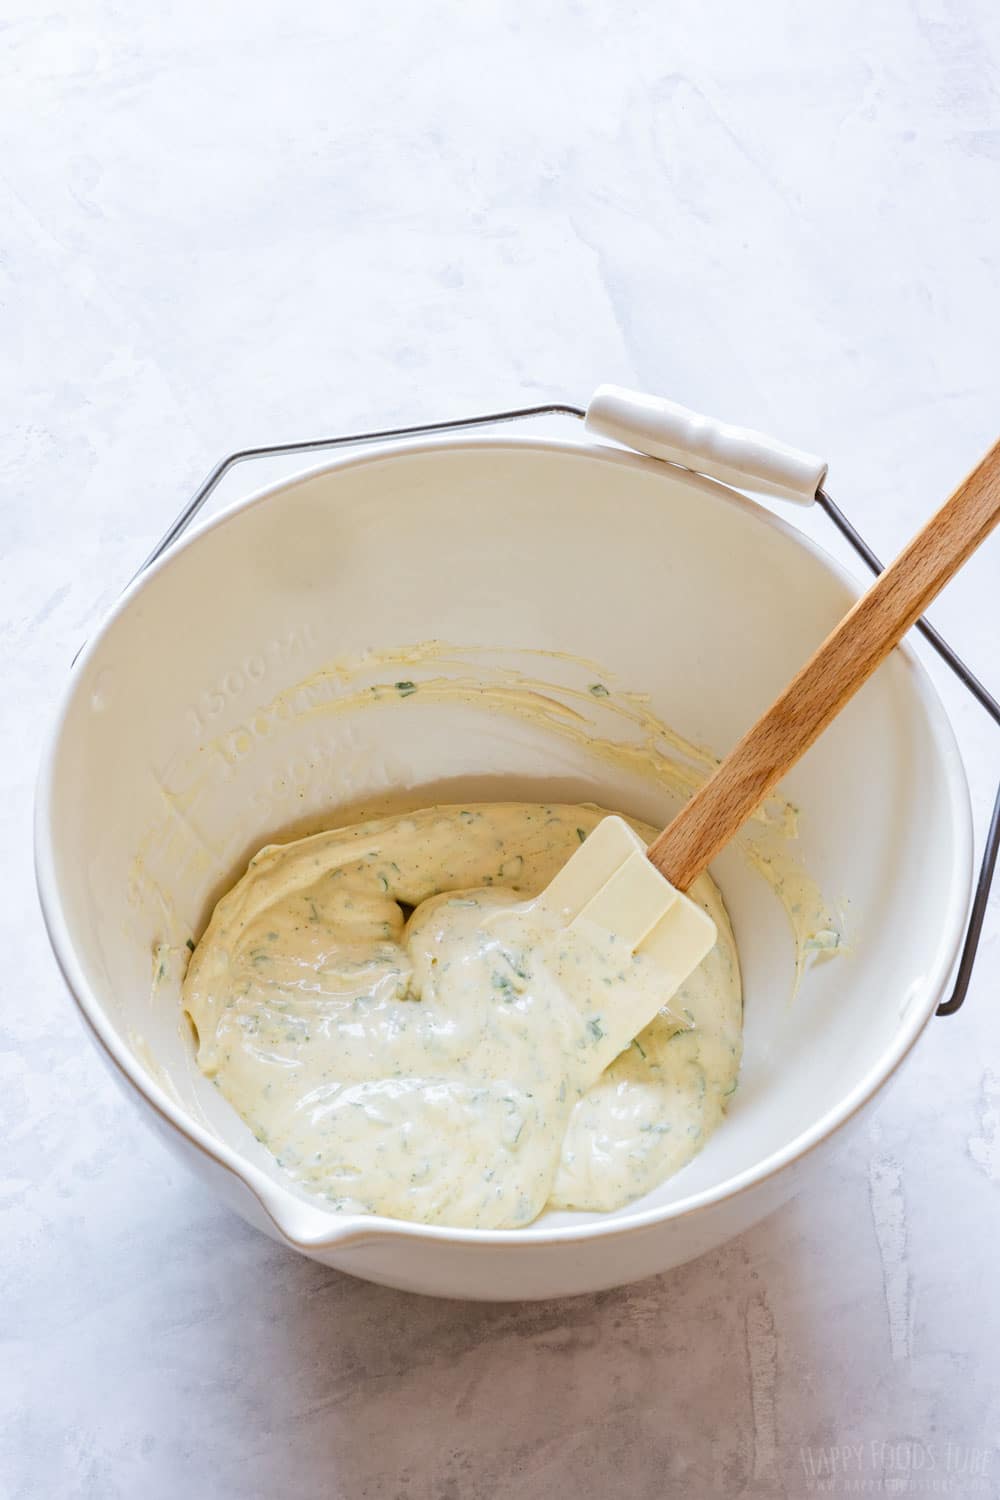 Creamy sauce in a large mixing bowl.